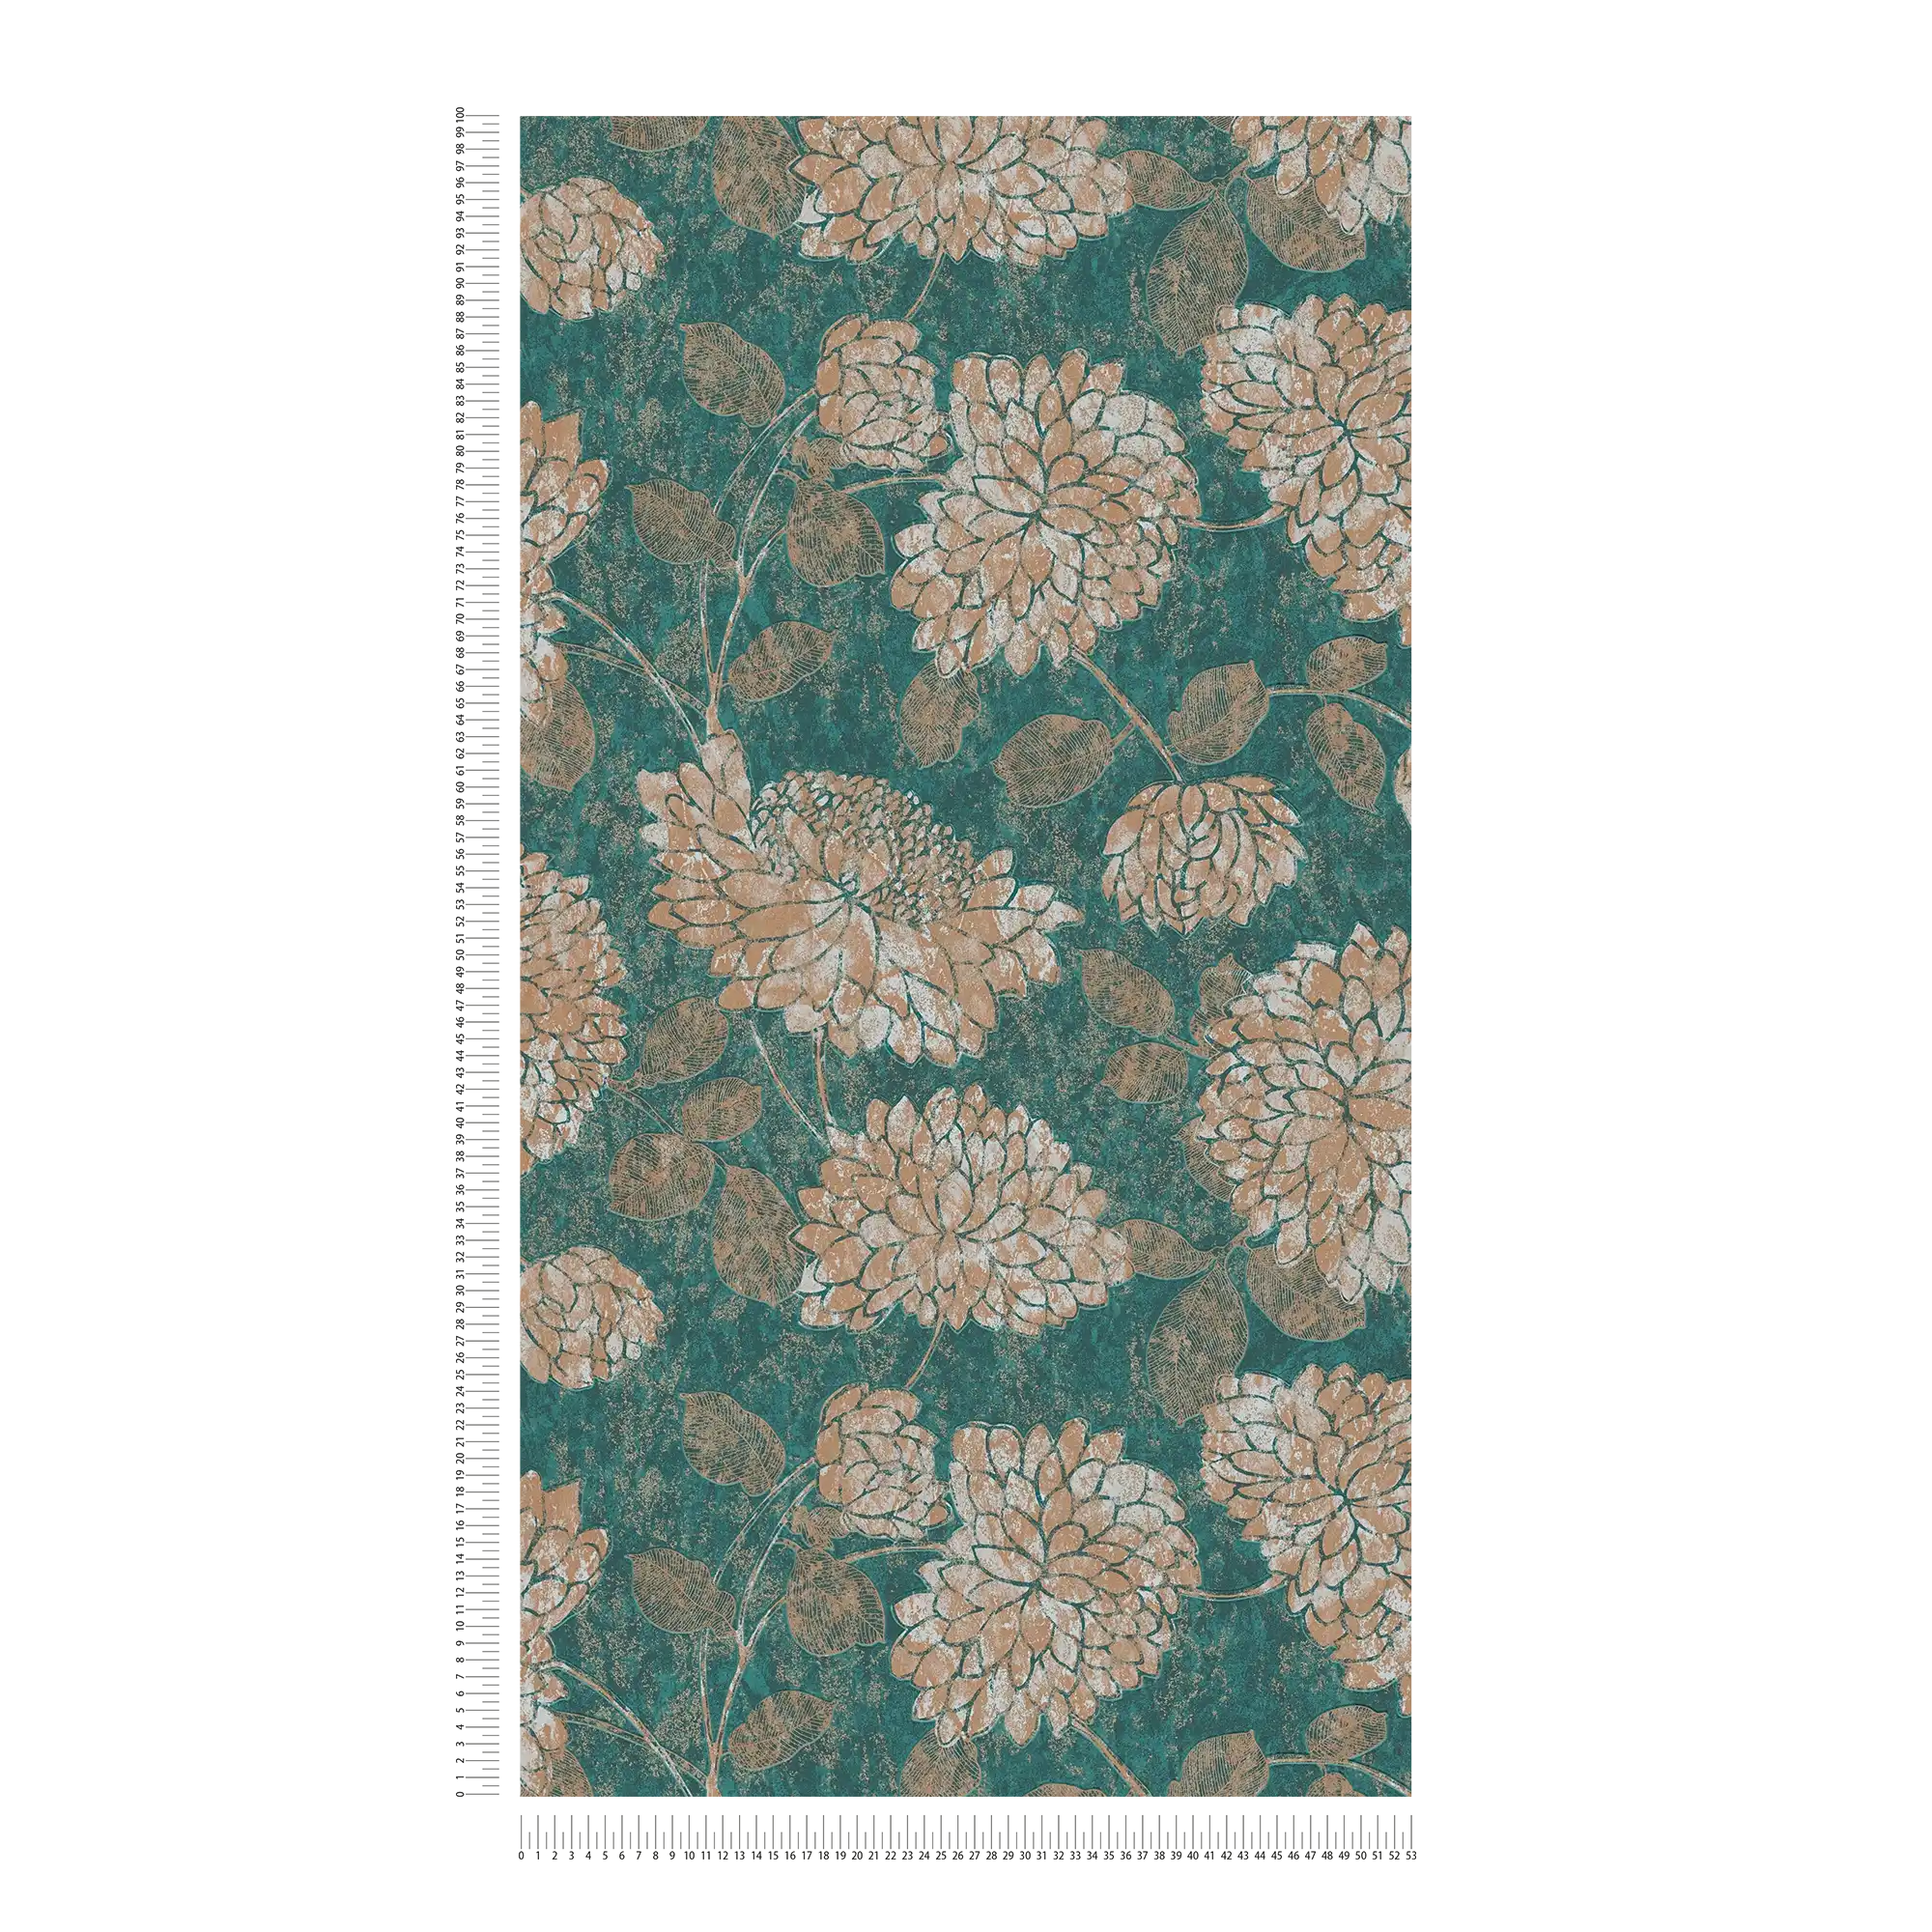             Floral wallpaper with floral pattern slightly shiny - green, gold
        